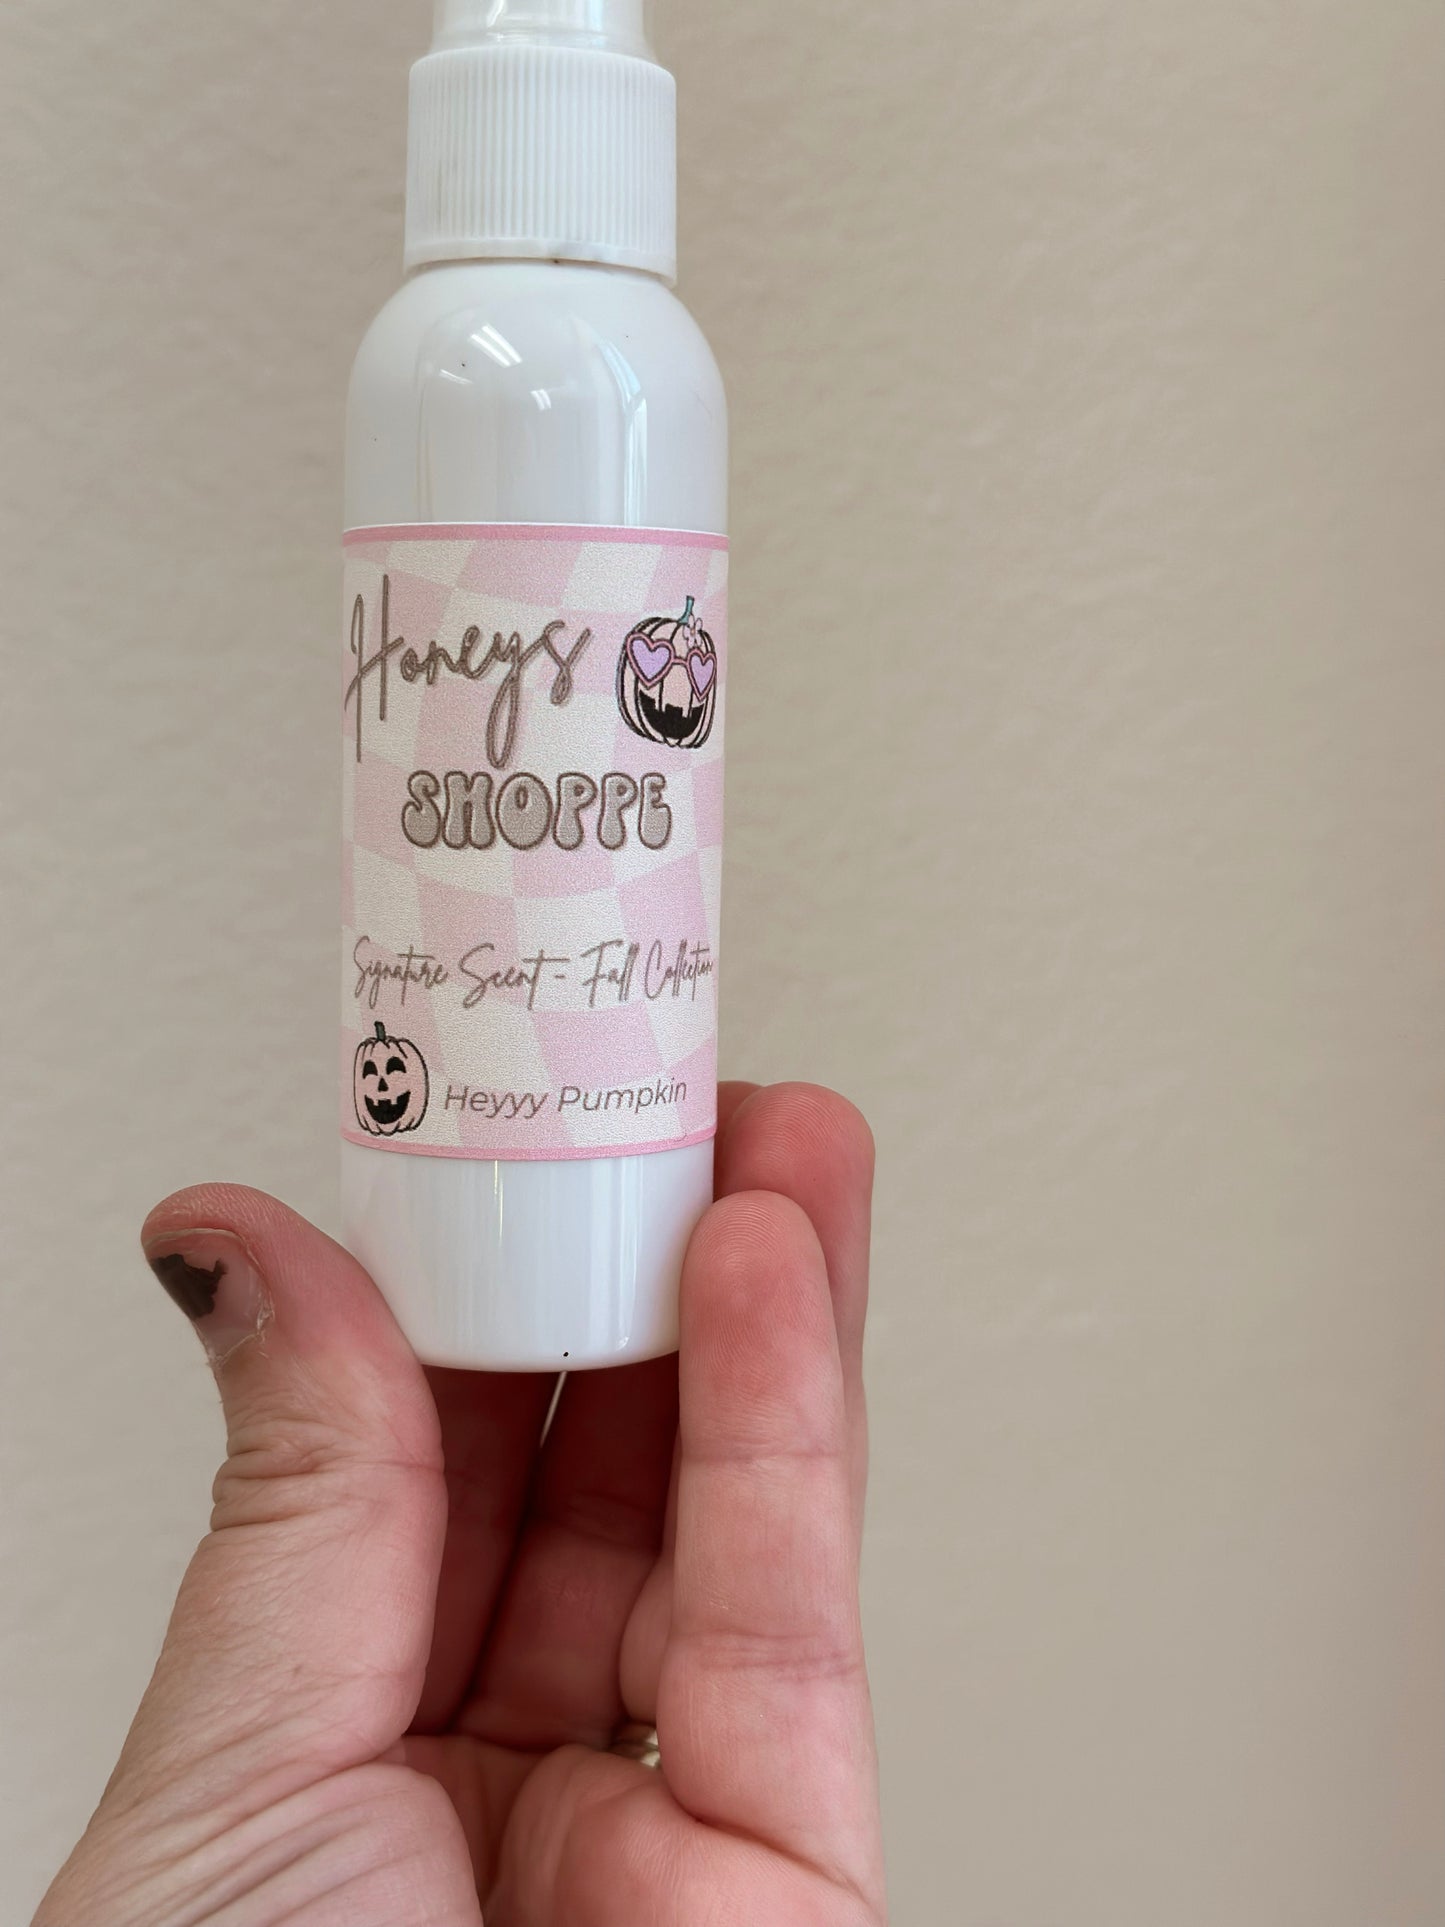 Fall Candle Collection - Heyyy Pumpkin Room Spray